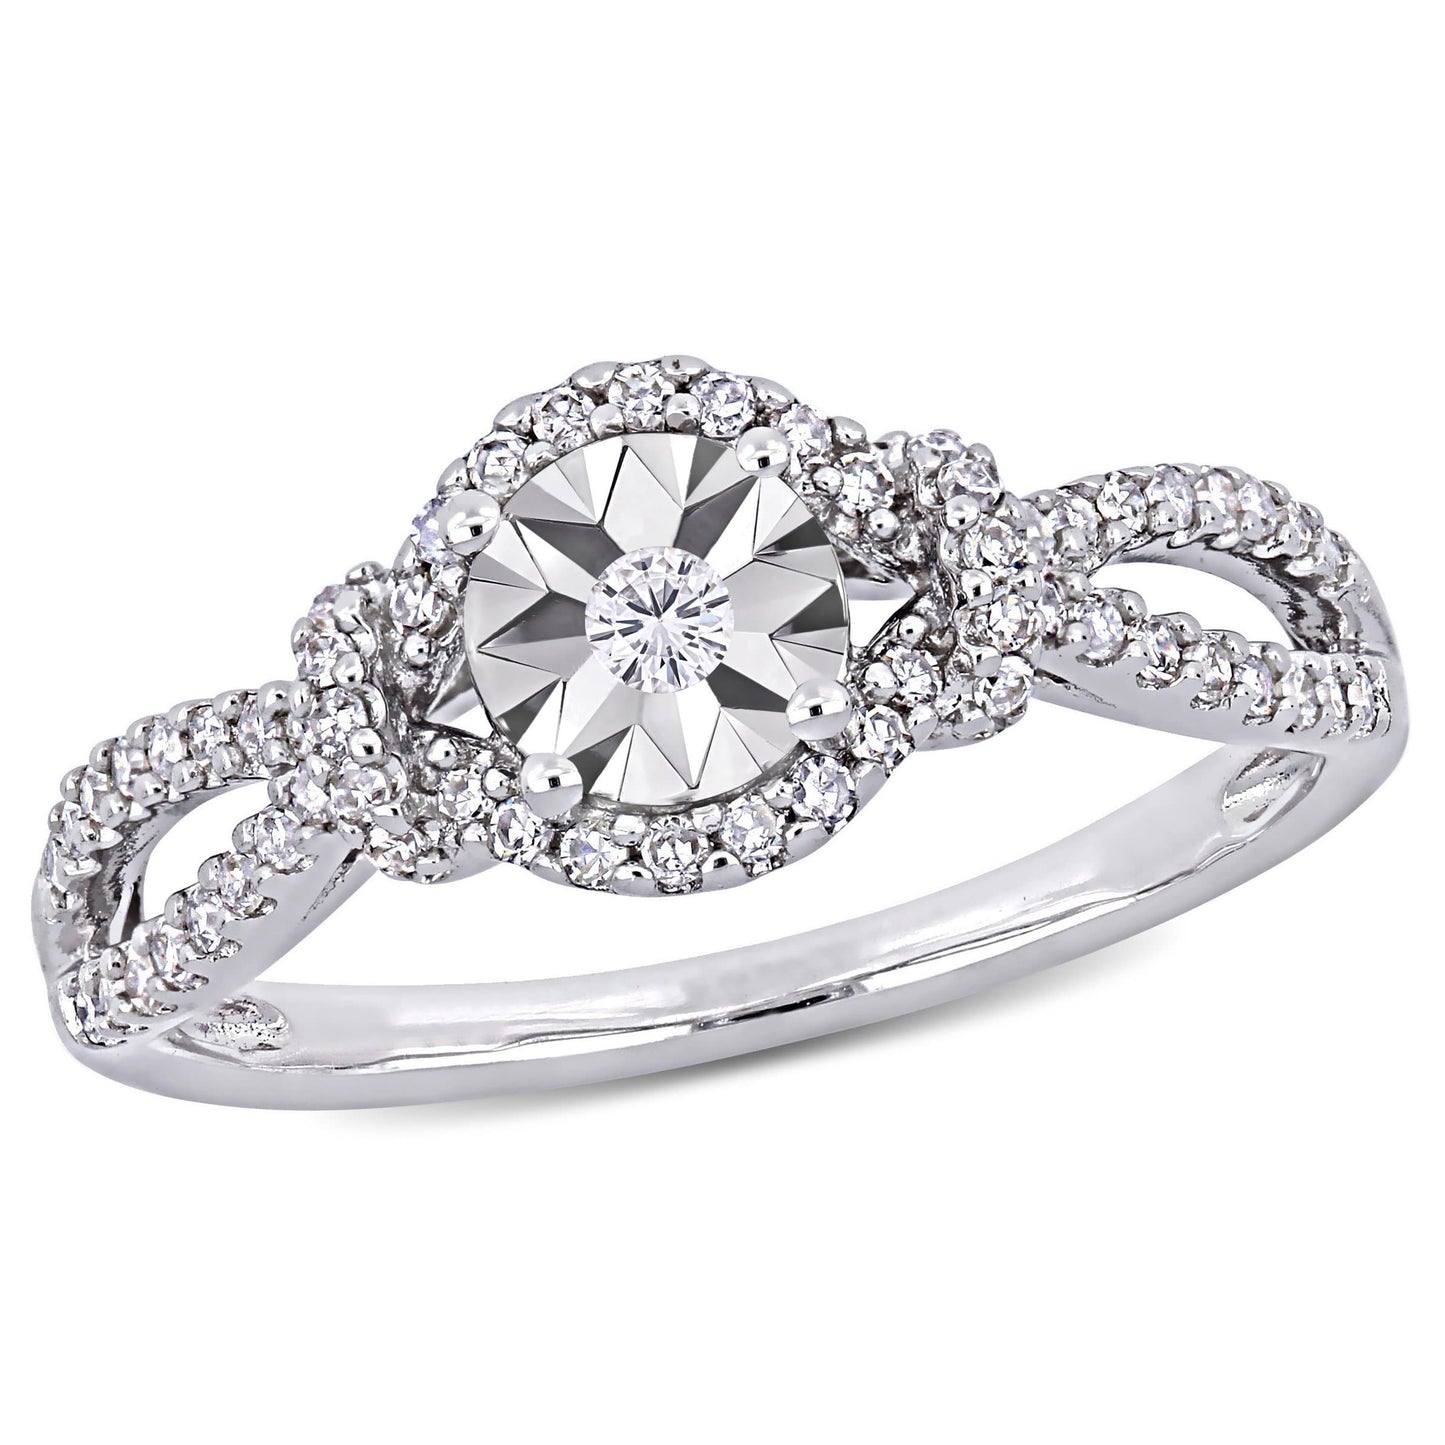 Julie Leah Round Diamond Ring in Sterling Silver